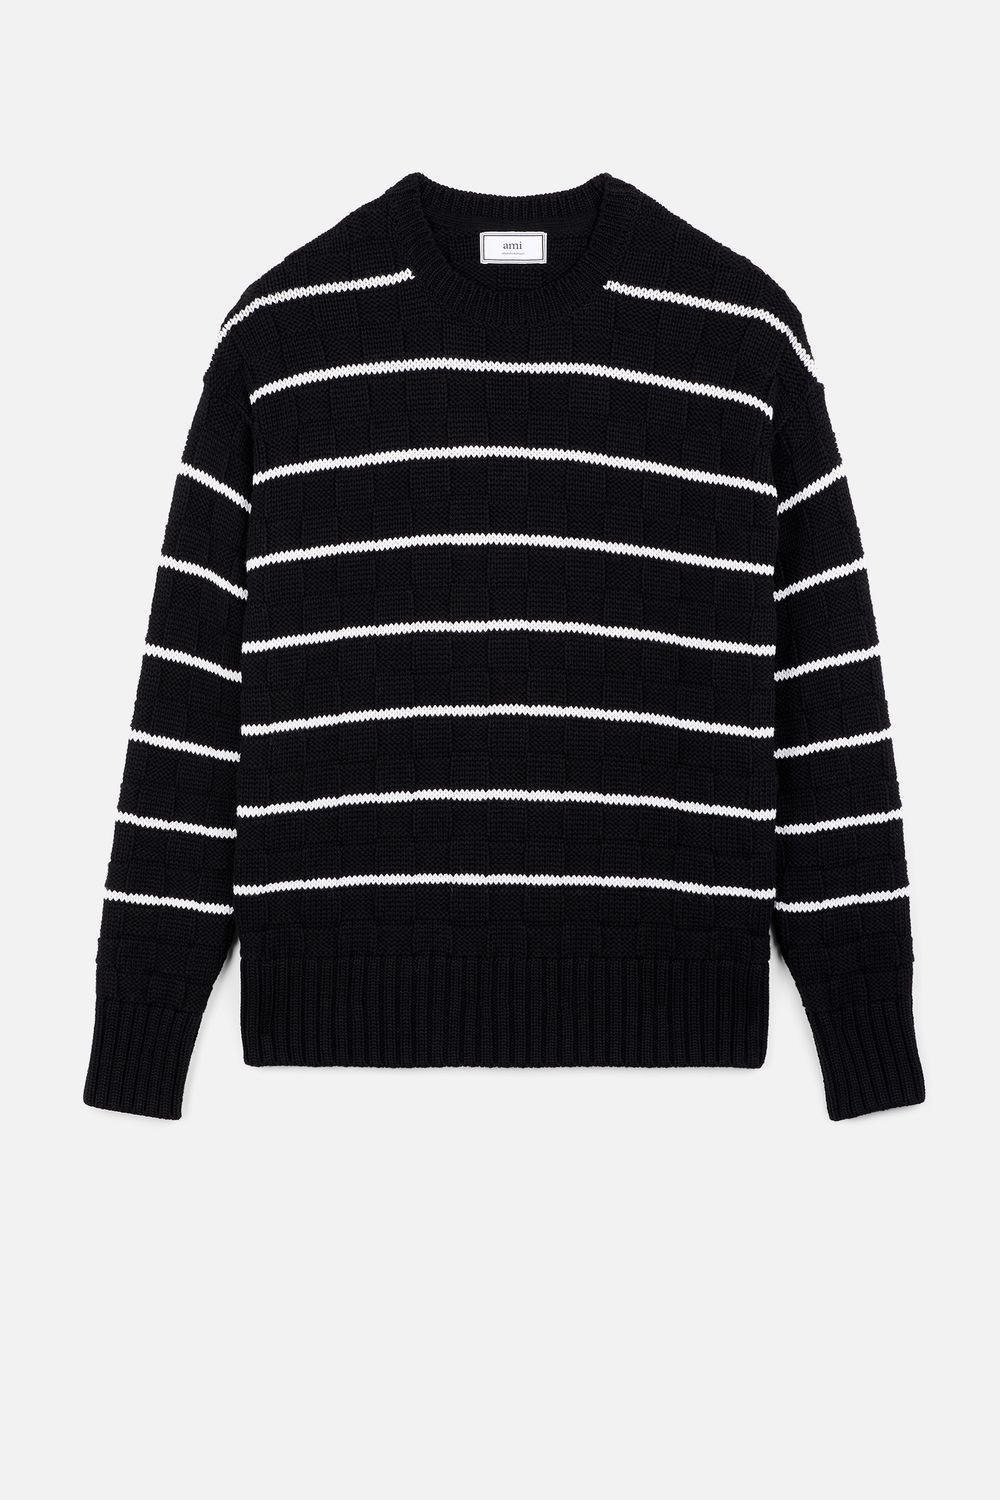 Striped Oversized Sweater - AMI Paris Official